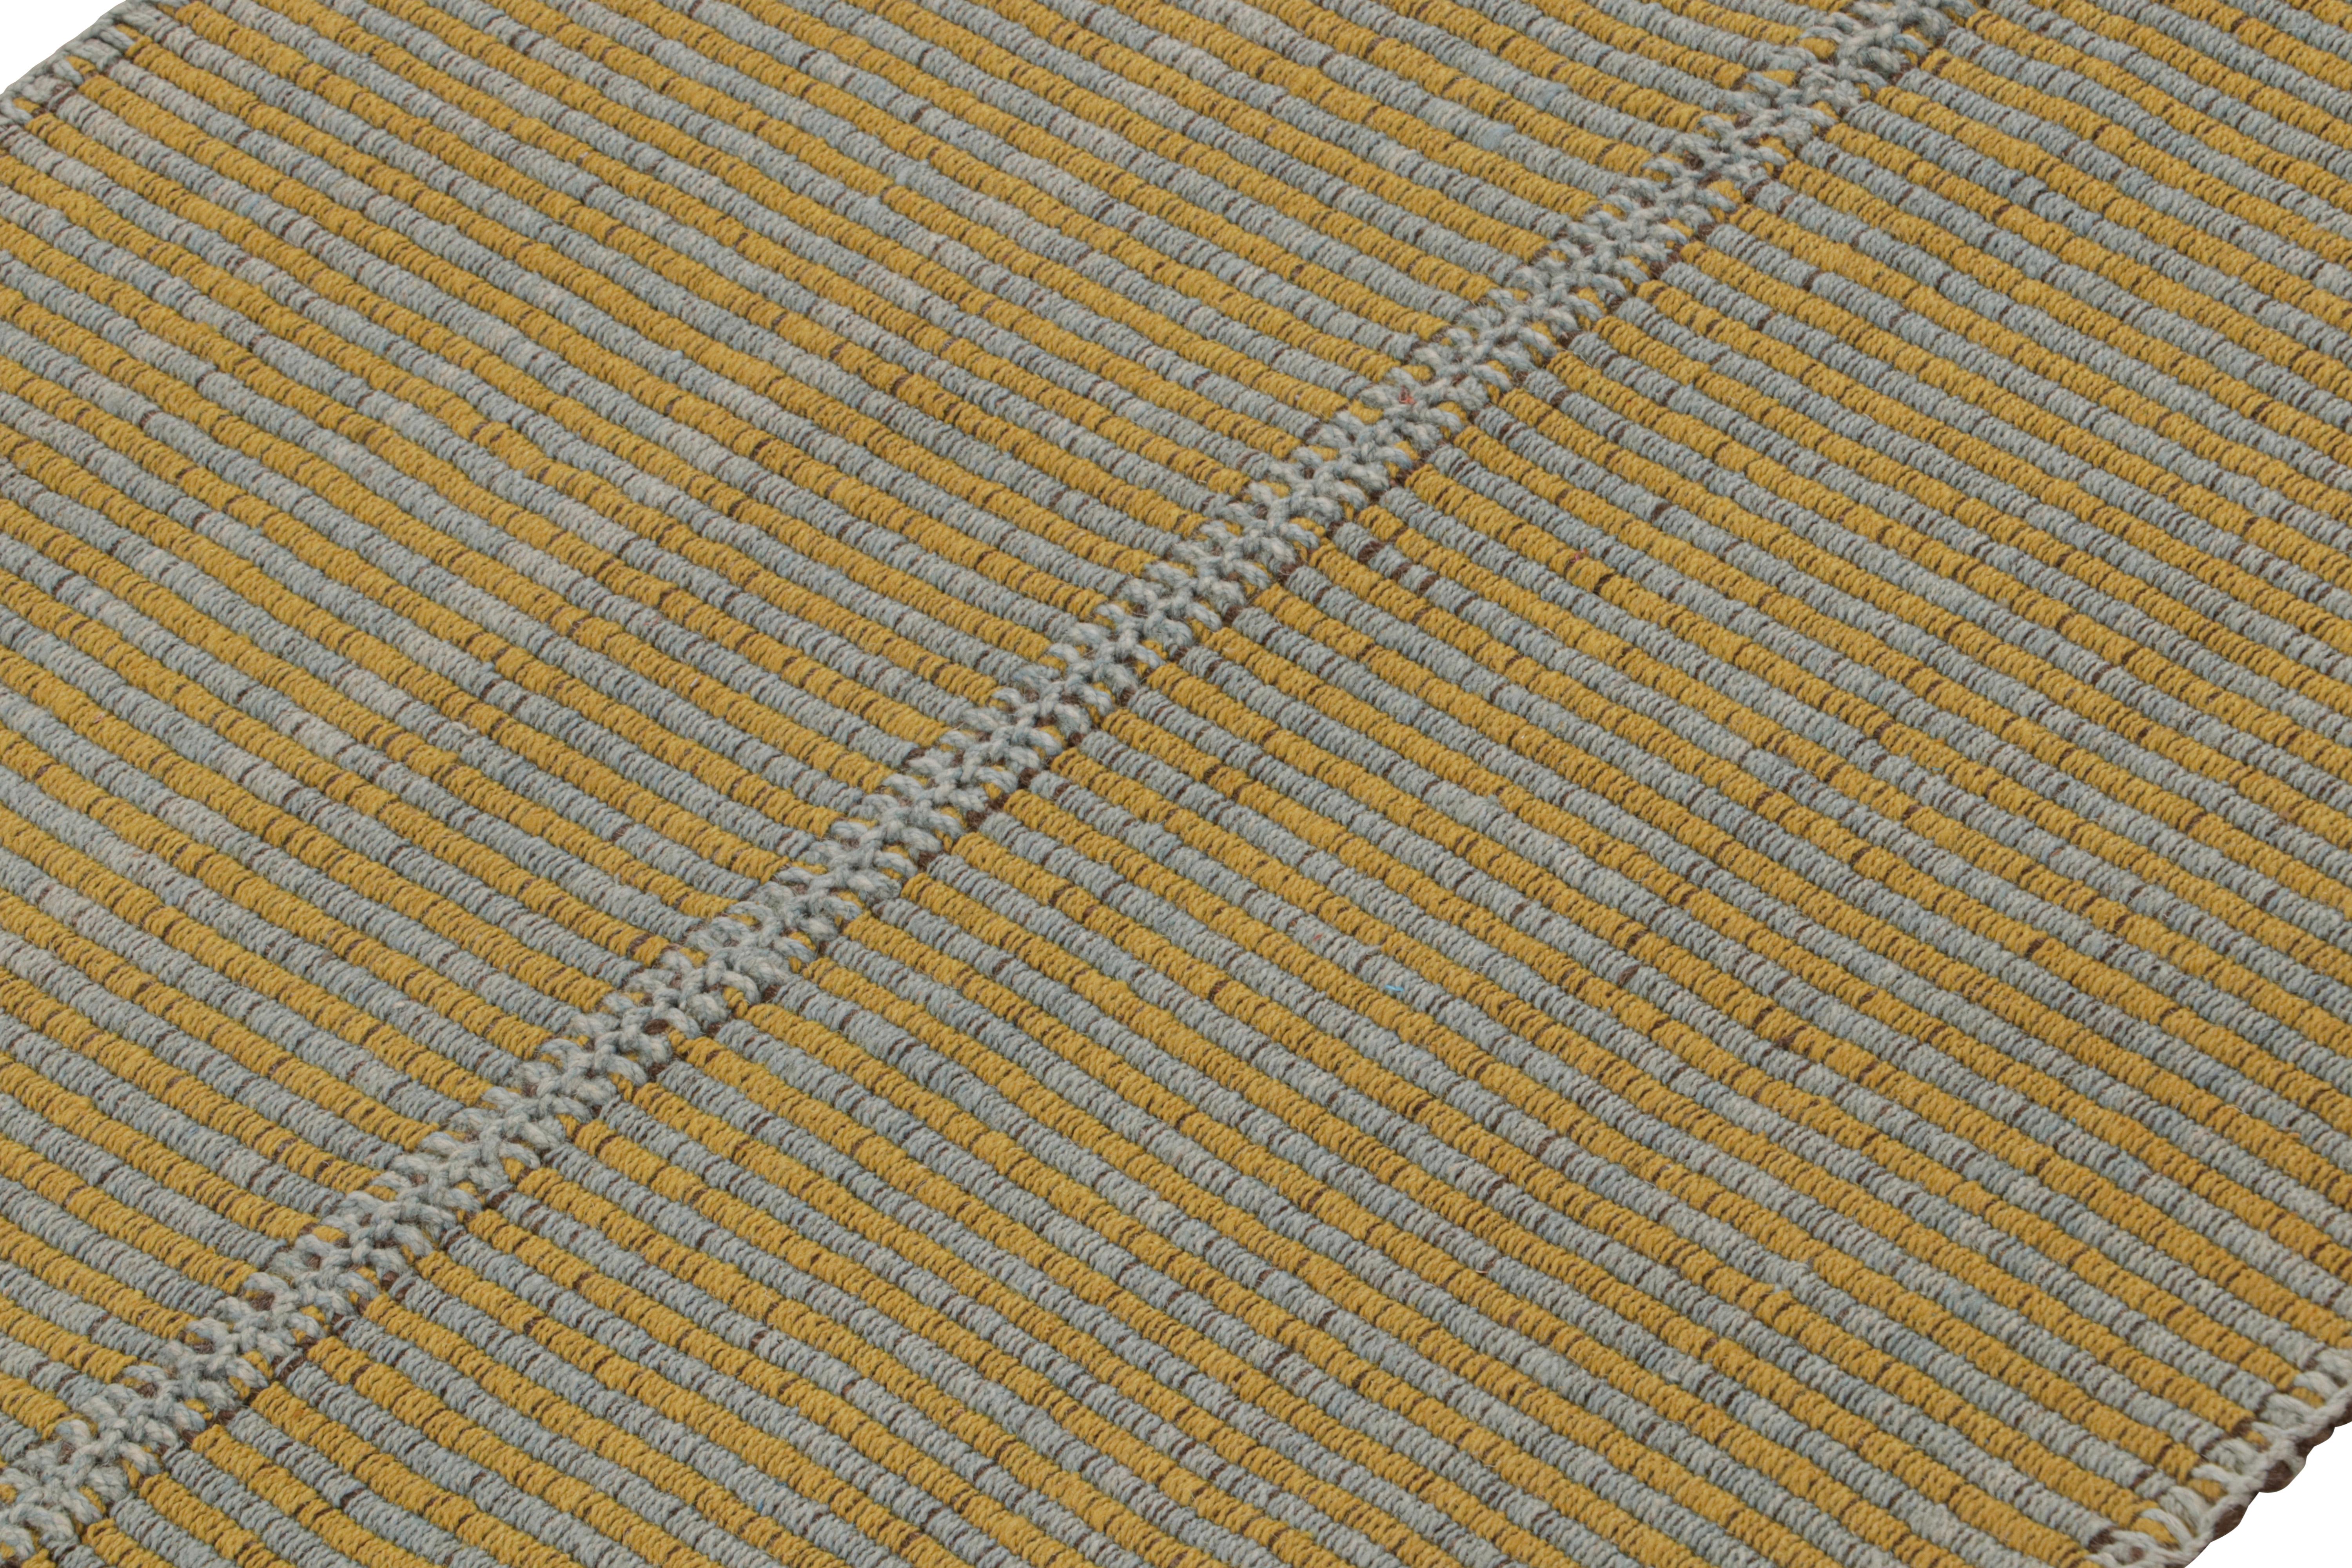 Handwoven in wool, this 3x3 square Kilim is from an inventive new contemporary flat weave collection by Rug & Kilim.

On the Design: 

Our “Rez Kilim” collection represents a unique modern take on classic Persian panel-weaving. This piece enjoys a